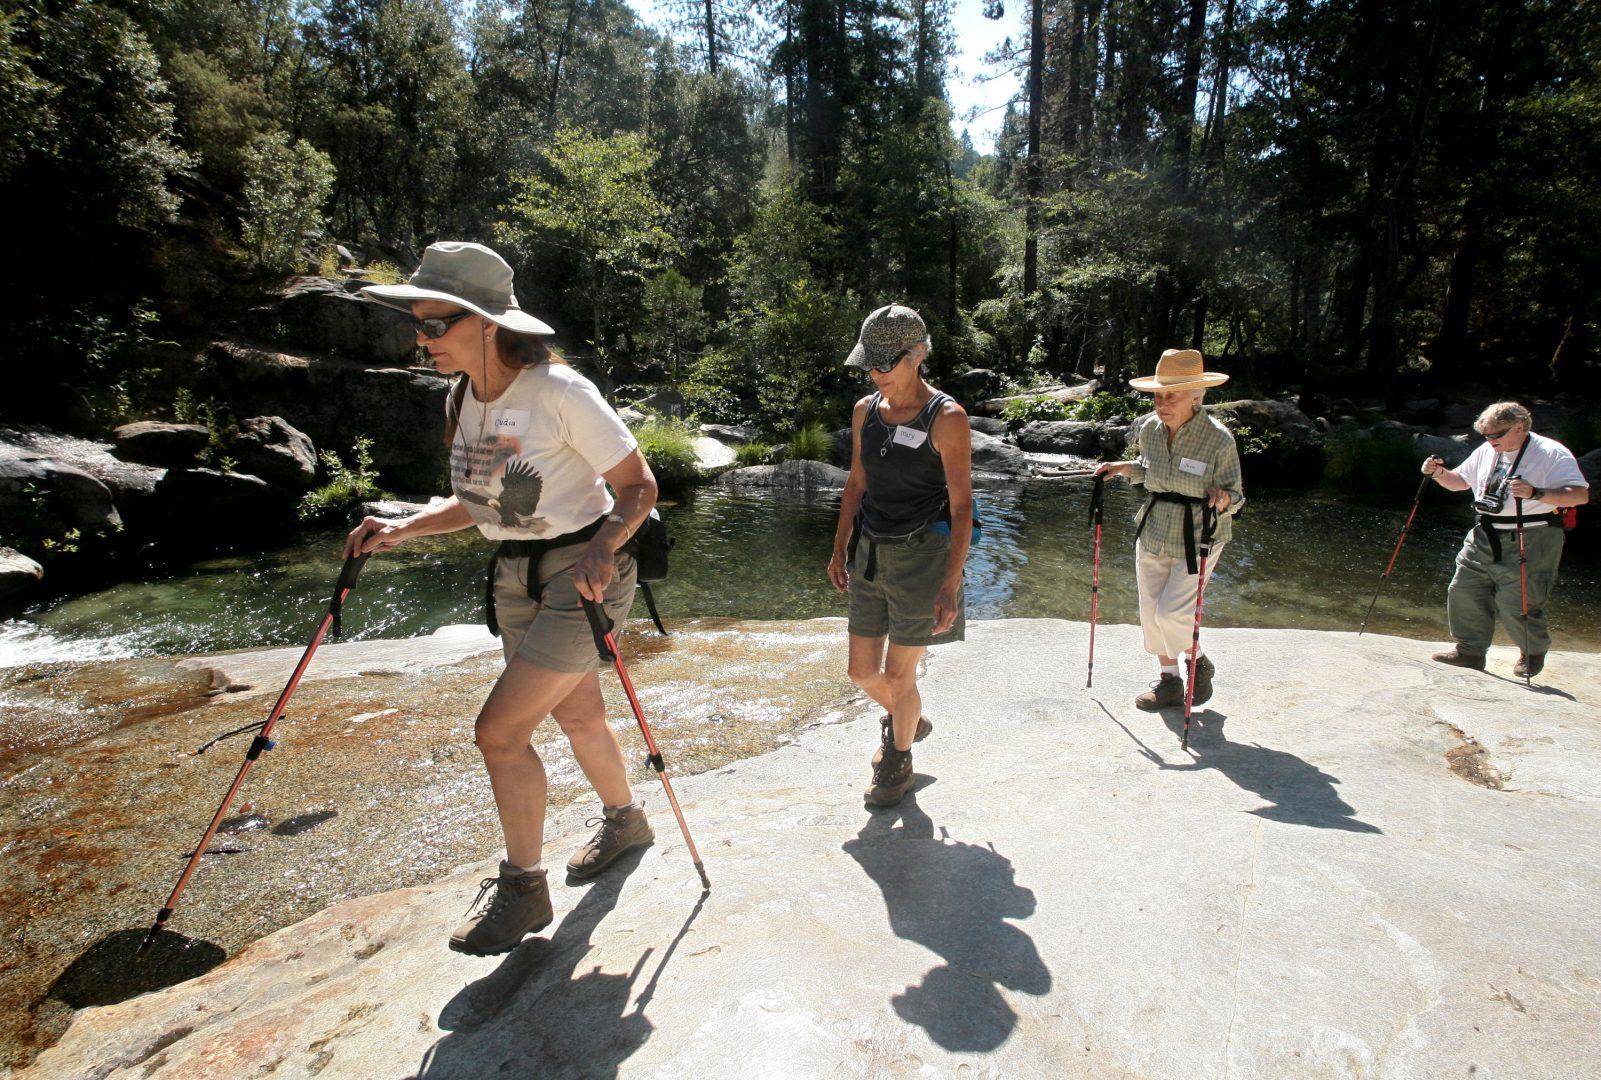 John Walker / TNS
Hikers walk along Willow Creek as it spills into a pool on their way  to Angel Falls at Bass Lake, Calif. From left: Claudia VanderBie, Mary Clayton, Jean VanderBie (Claudias mother) and Jack Sheehan. 